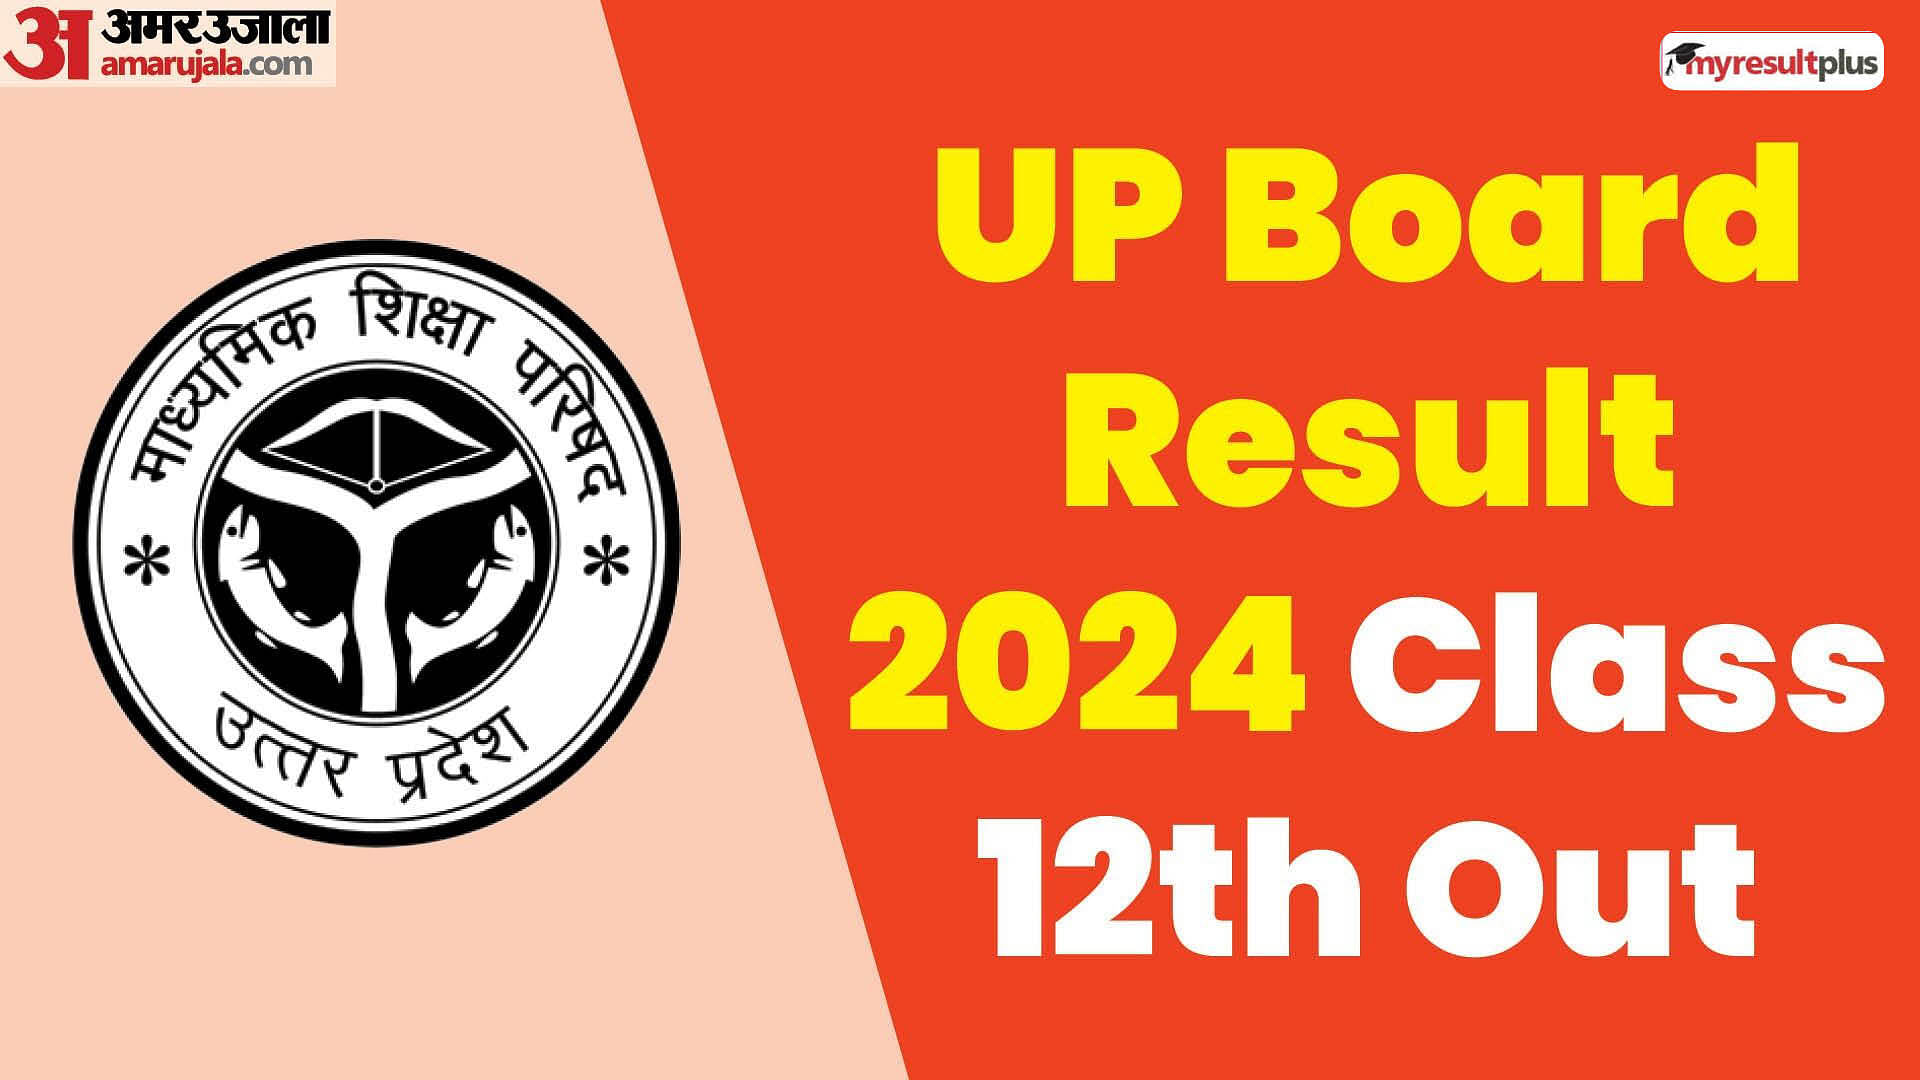 UP Board Result 2024 Class 12th Out Now, Read the overview, pass percentage and details of results here